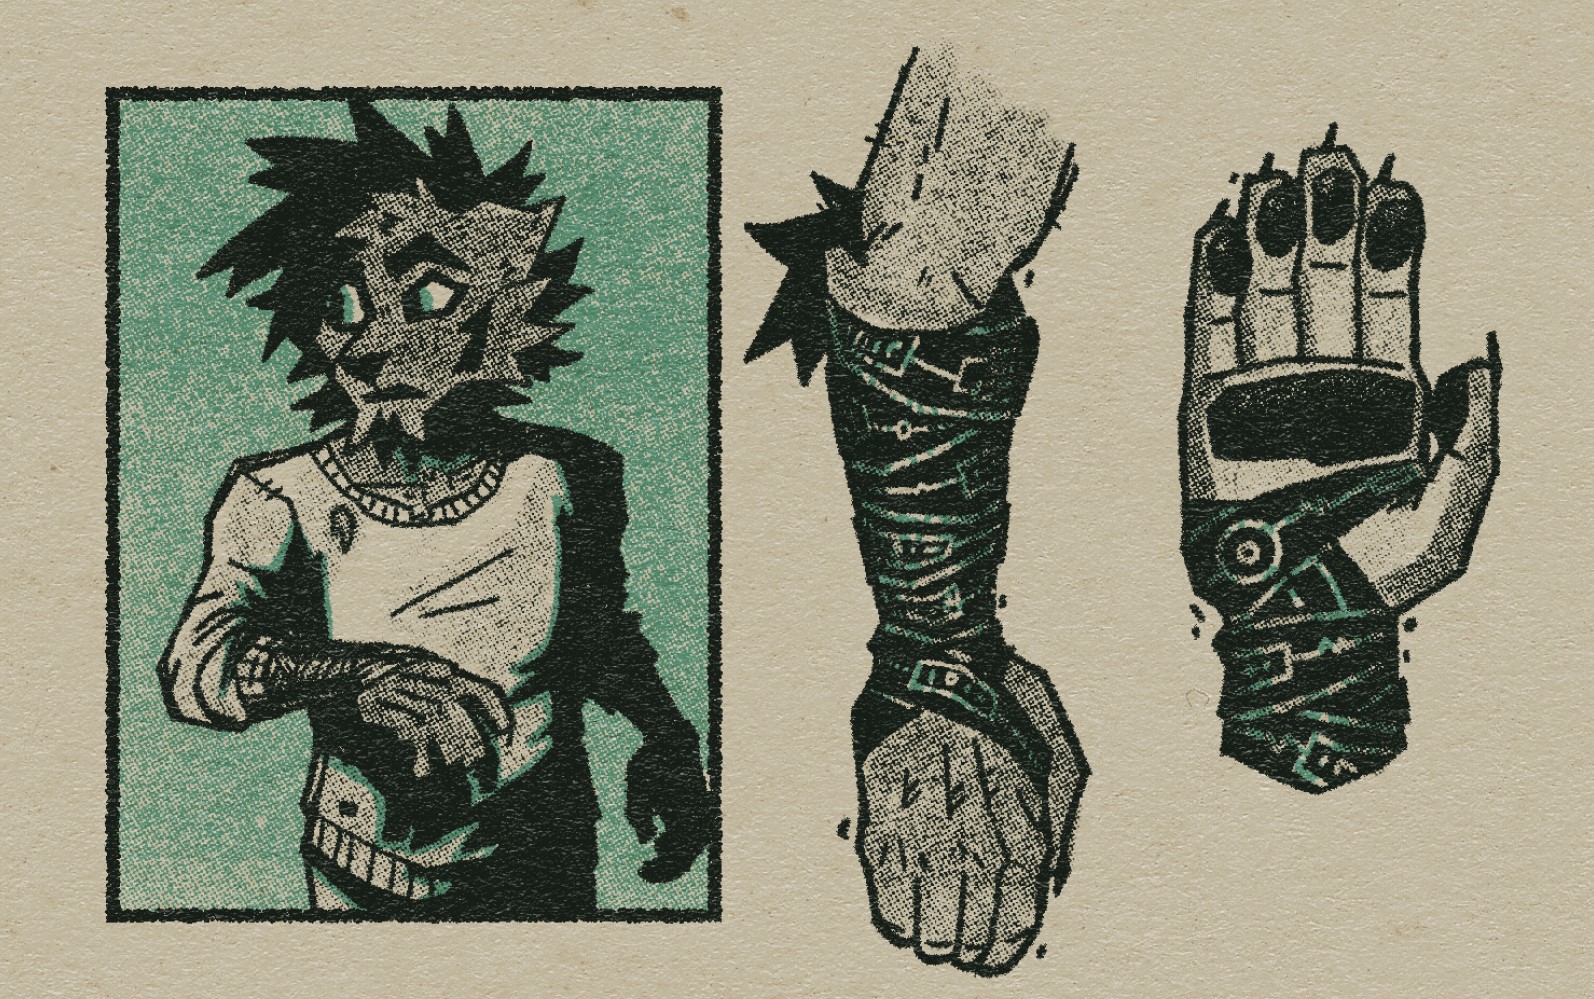 Three illustrations in one. First, a waist-up shot of the same character featured previously, glancing to one side as though caught somewhat off guard. Next is a shot of an arm wrapped in a bandage-like material marked with lines and symbols. Lastly, a paw-hand partially wrapped in the same material with a distinct eye-like symbol over the lower palm.